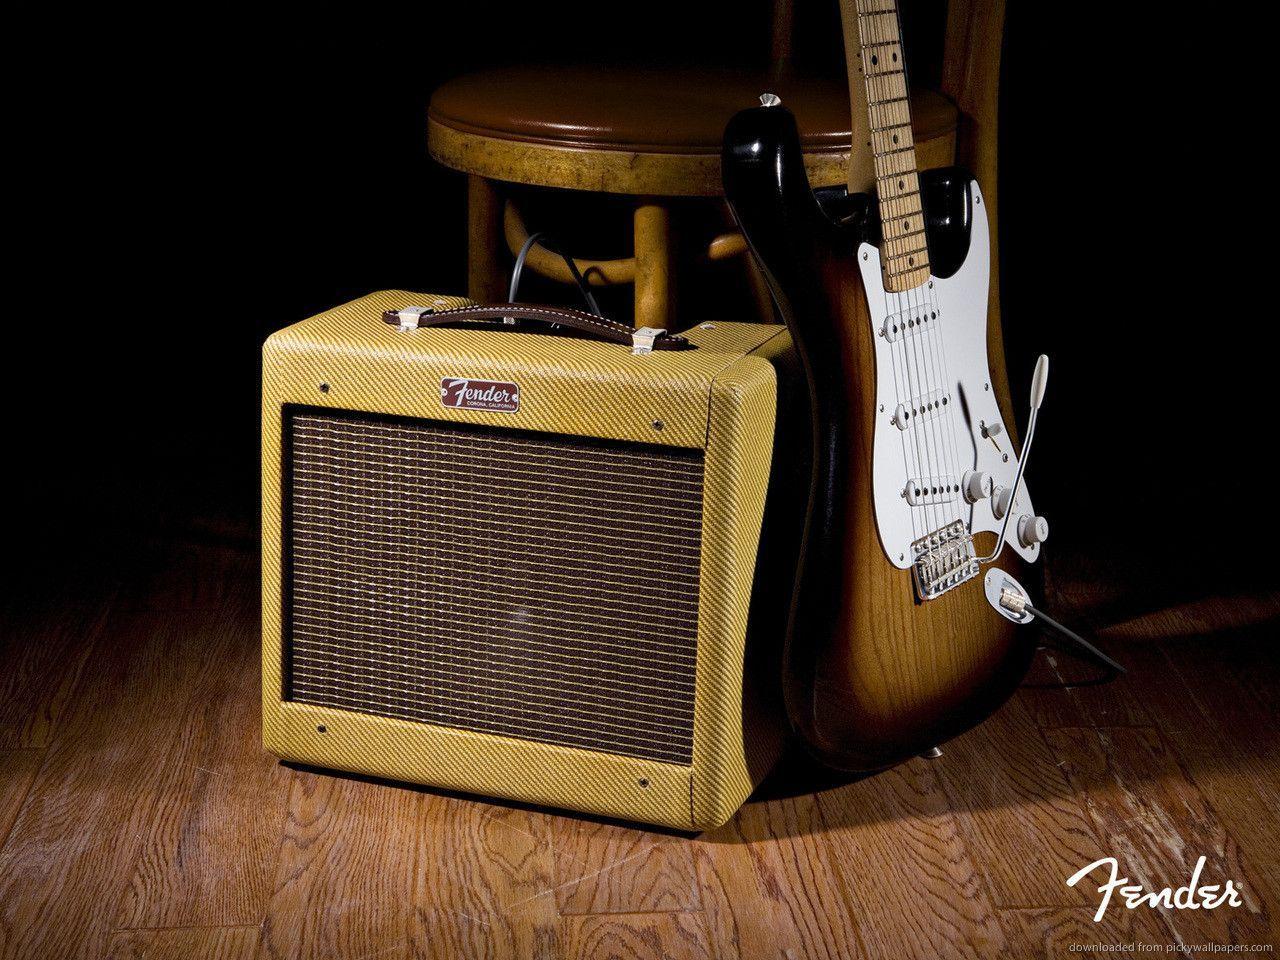 Download 1280x960 Old Fender Amp And Electric Guitar Wallpaper